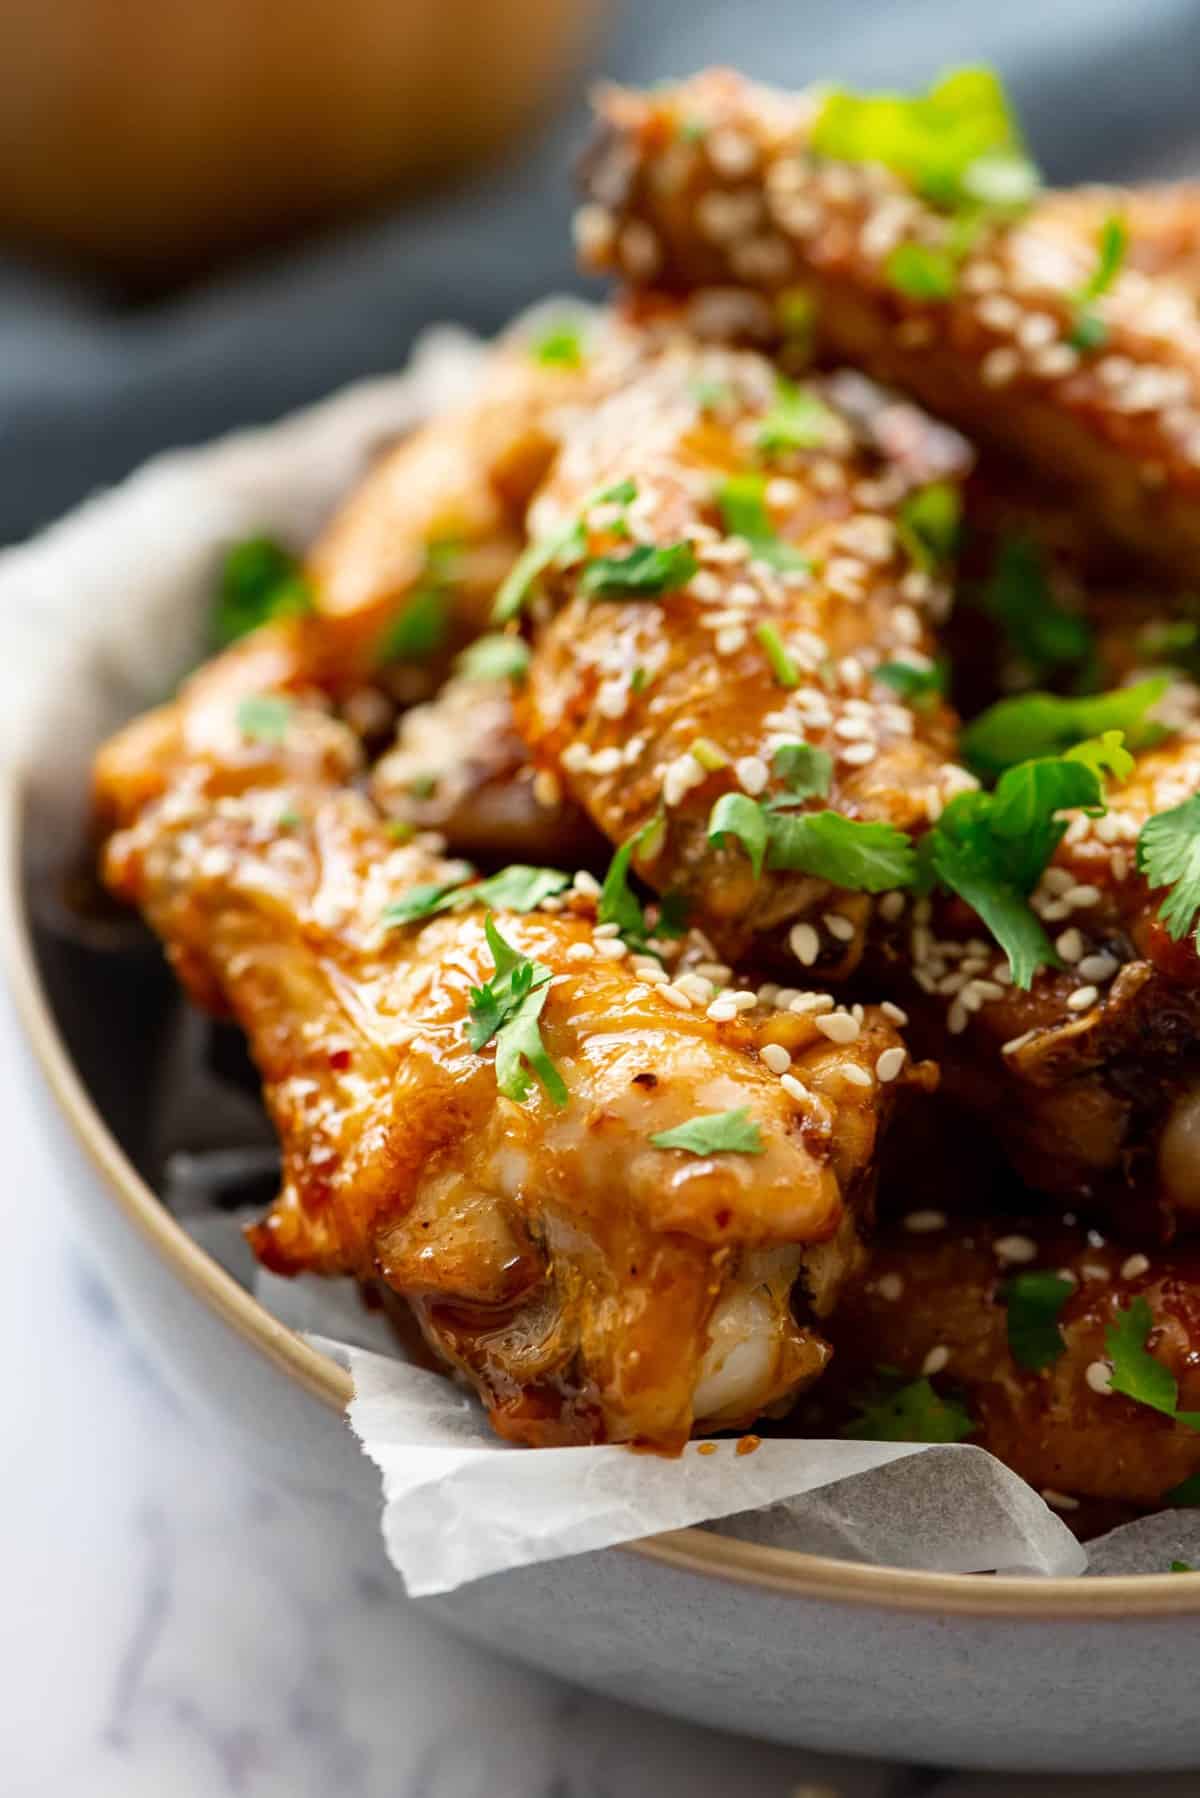 Honey Glazed Chicken Wings garnished with herbs and white seeds